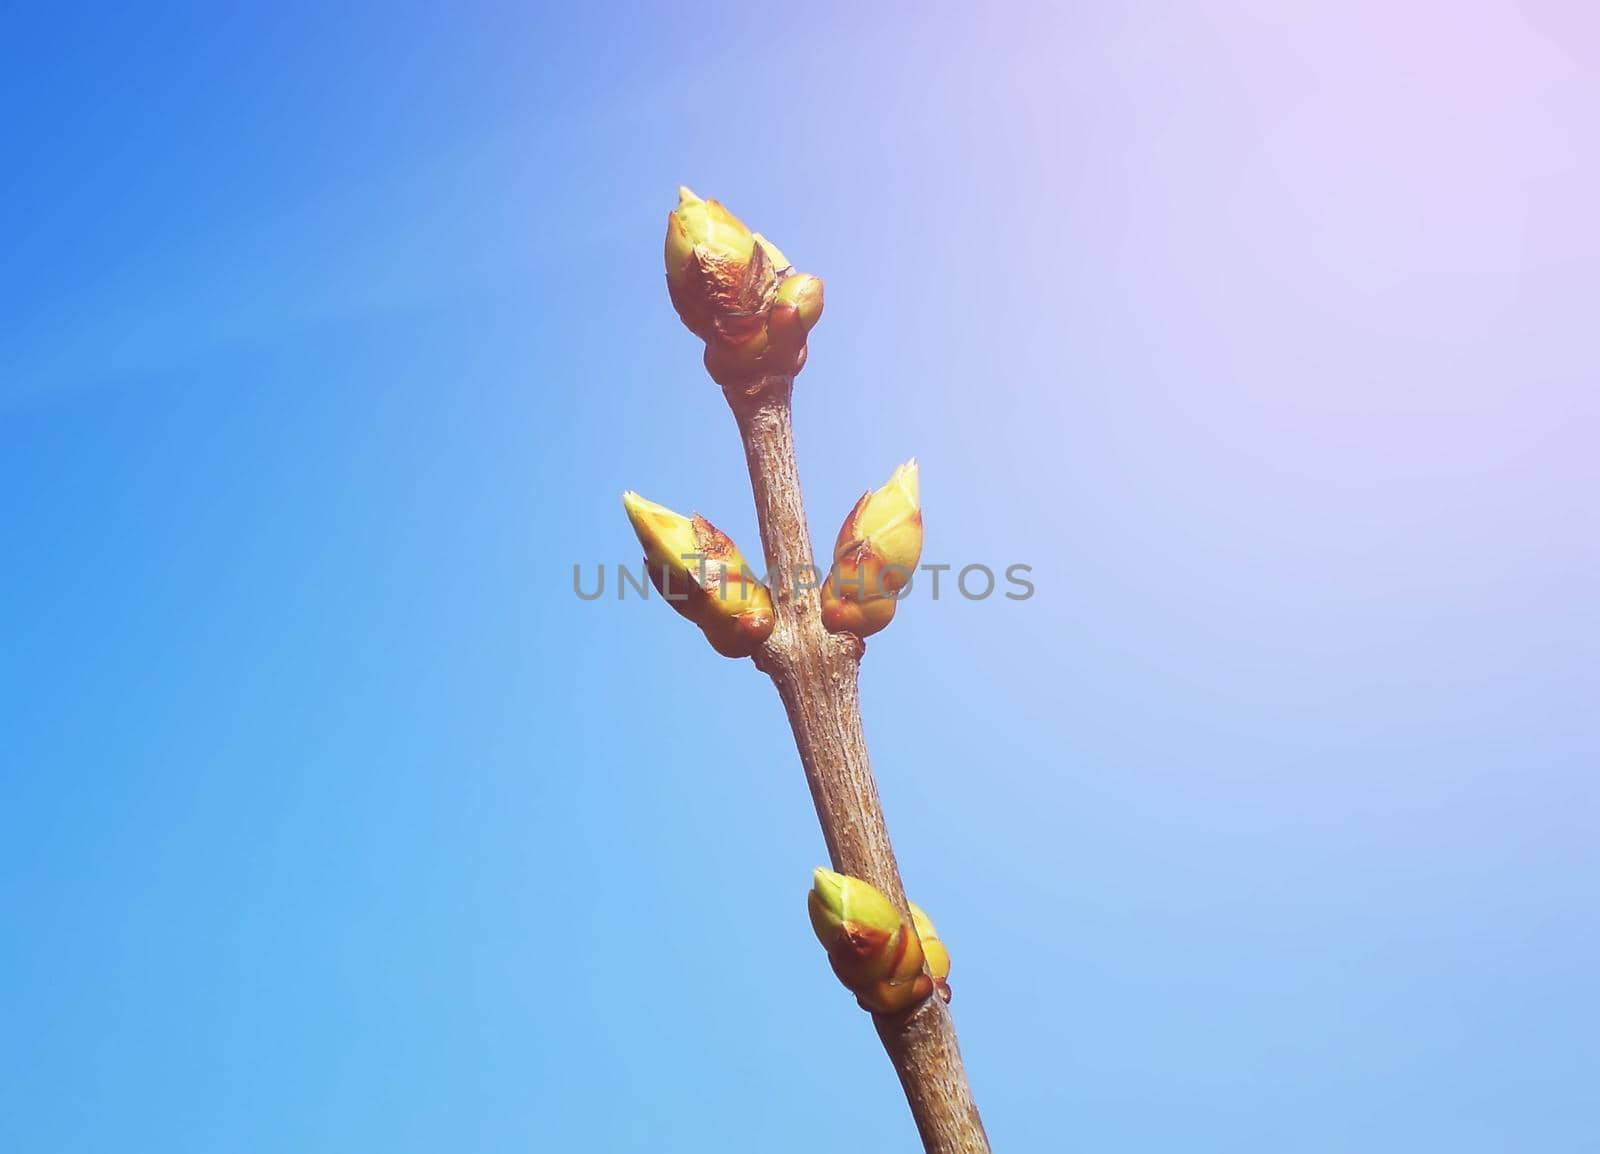 Green buds on tree branches in spring forest on blue sky background.